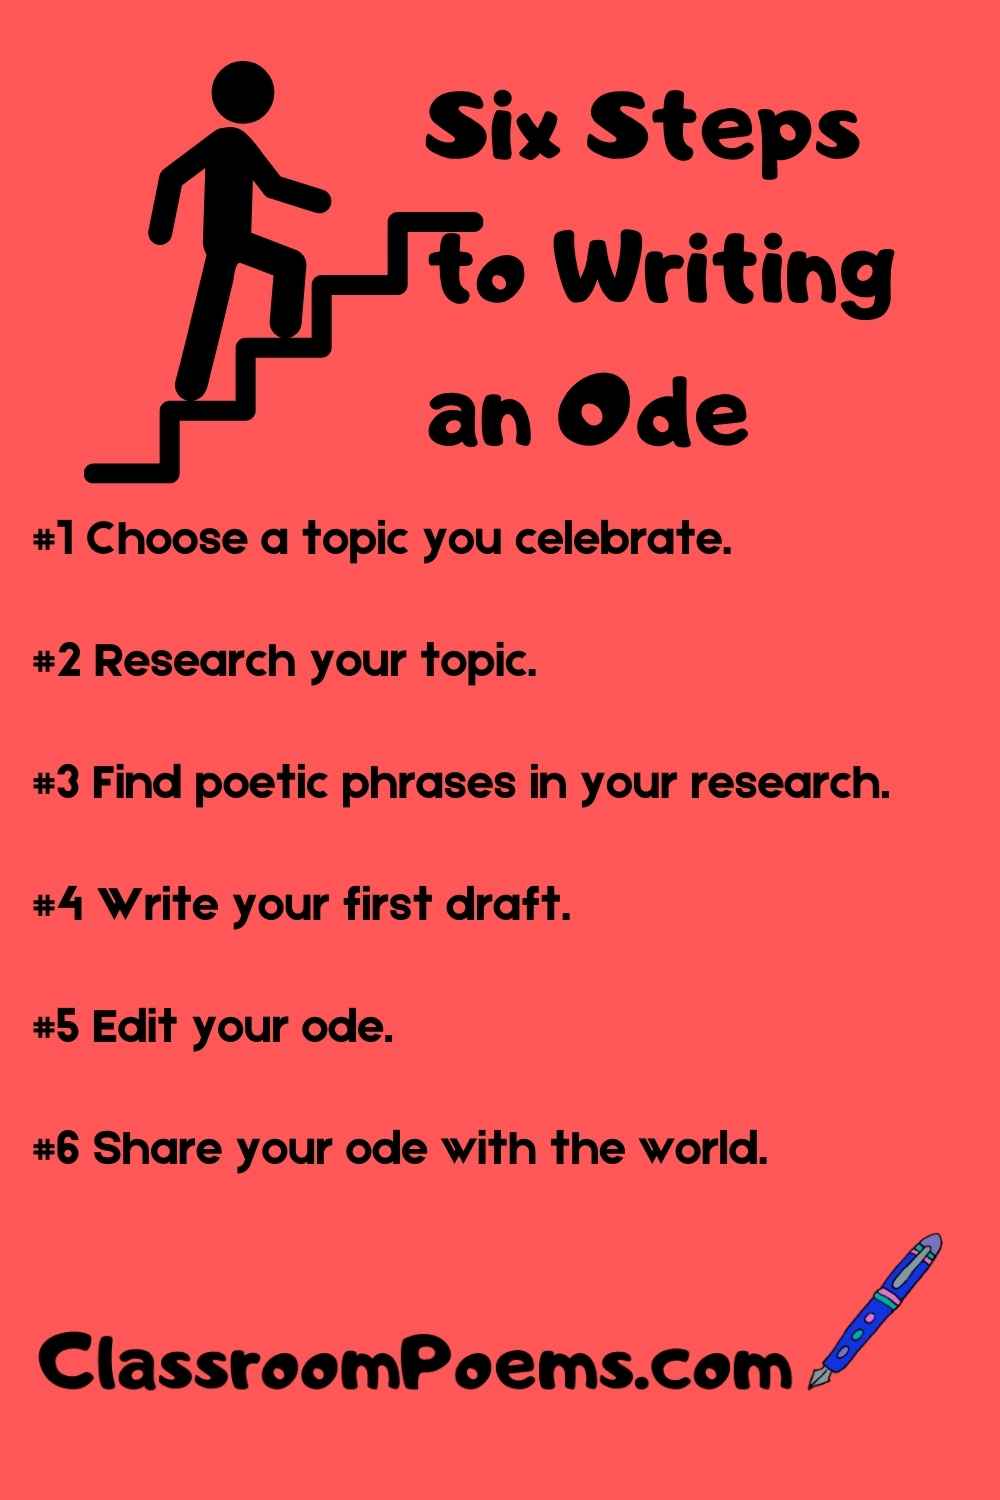 How to write an Ode Poem by Denise Rodgers on ClassroomPoems.com.